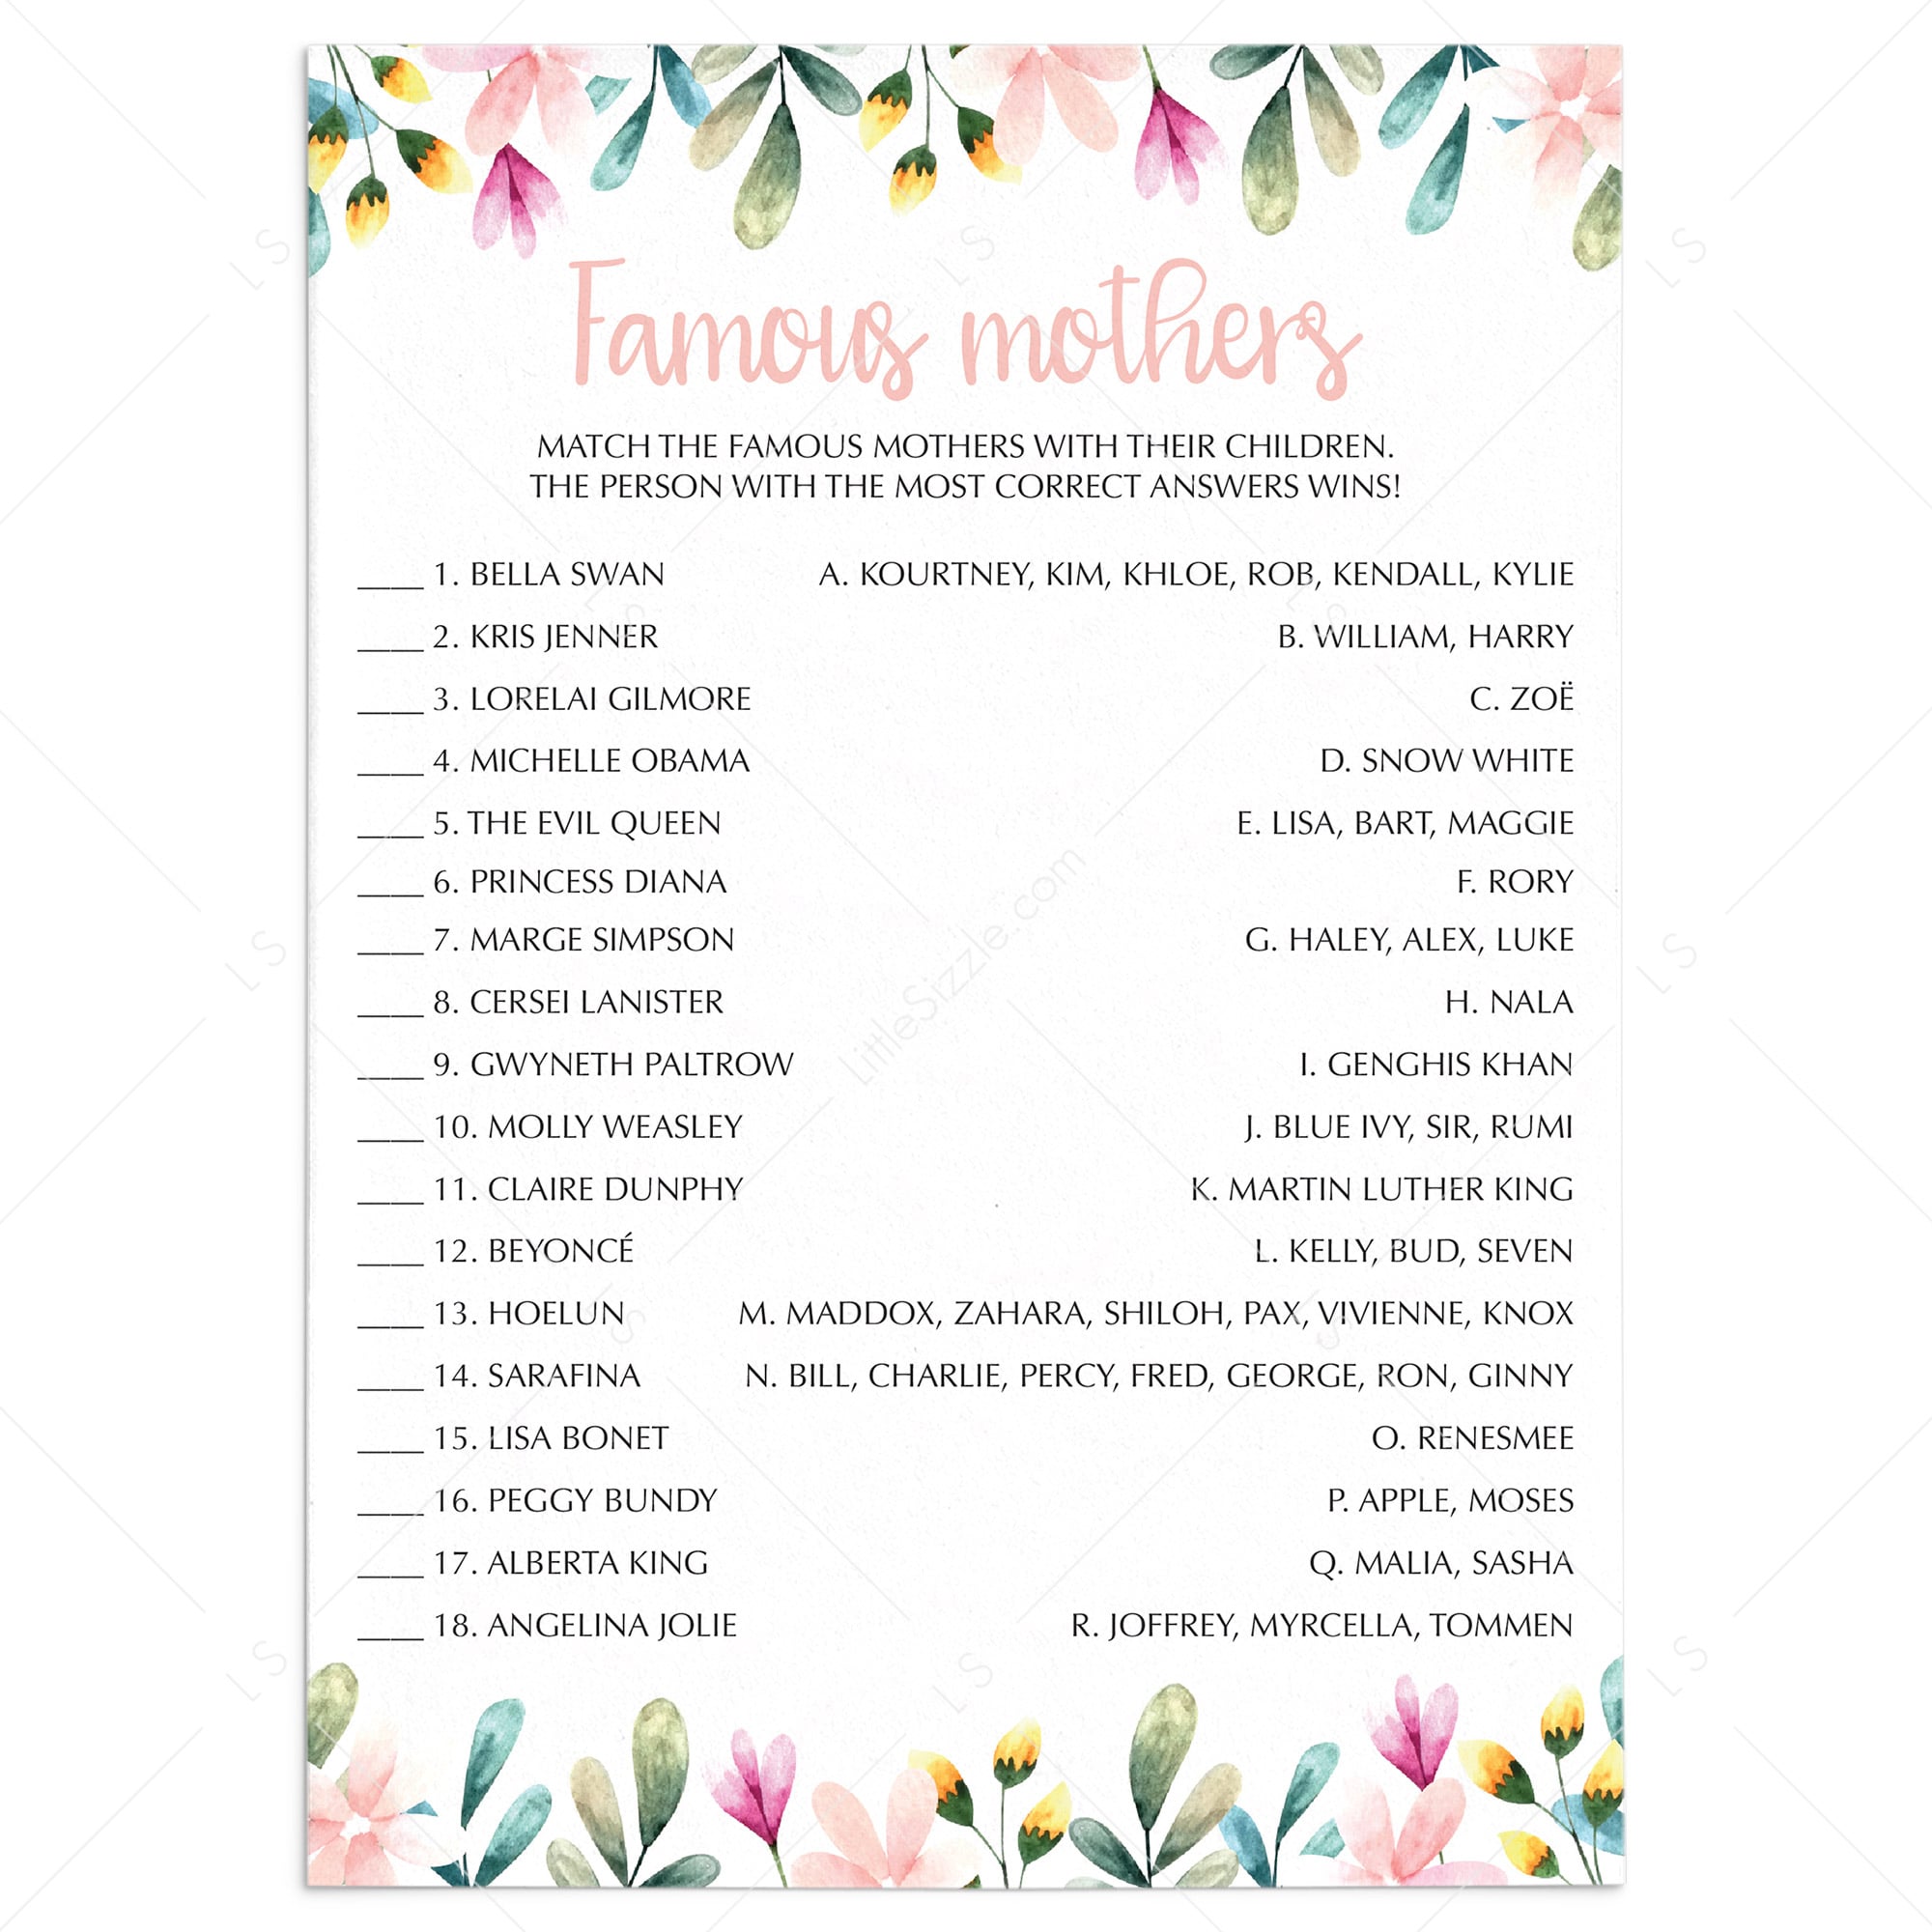 Celebrity Moms Game Download Printable & Virtual by LittleSizzle